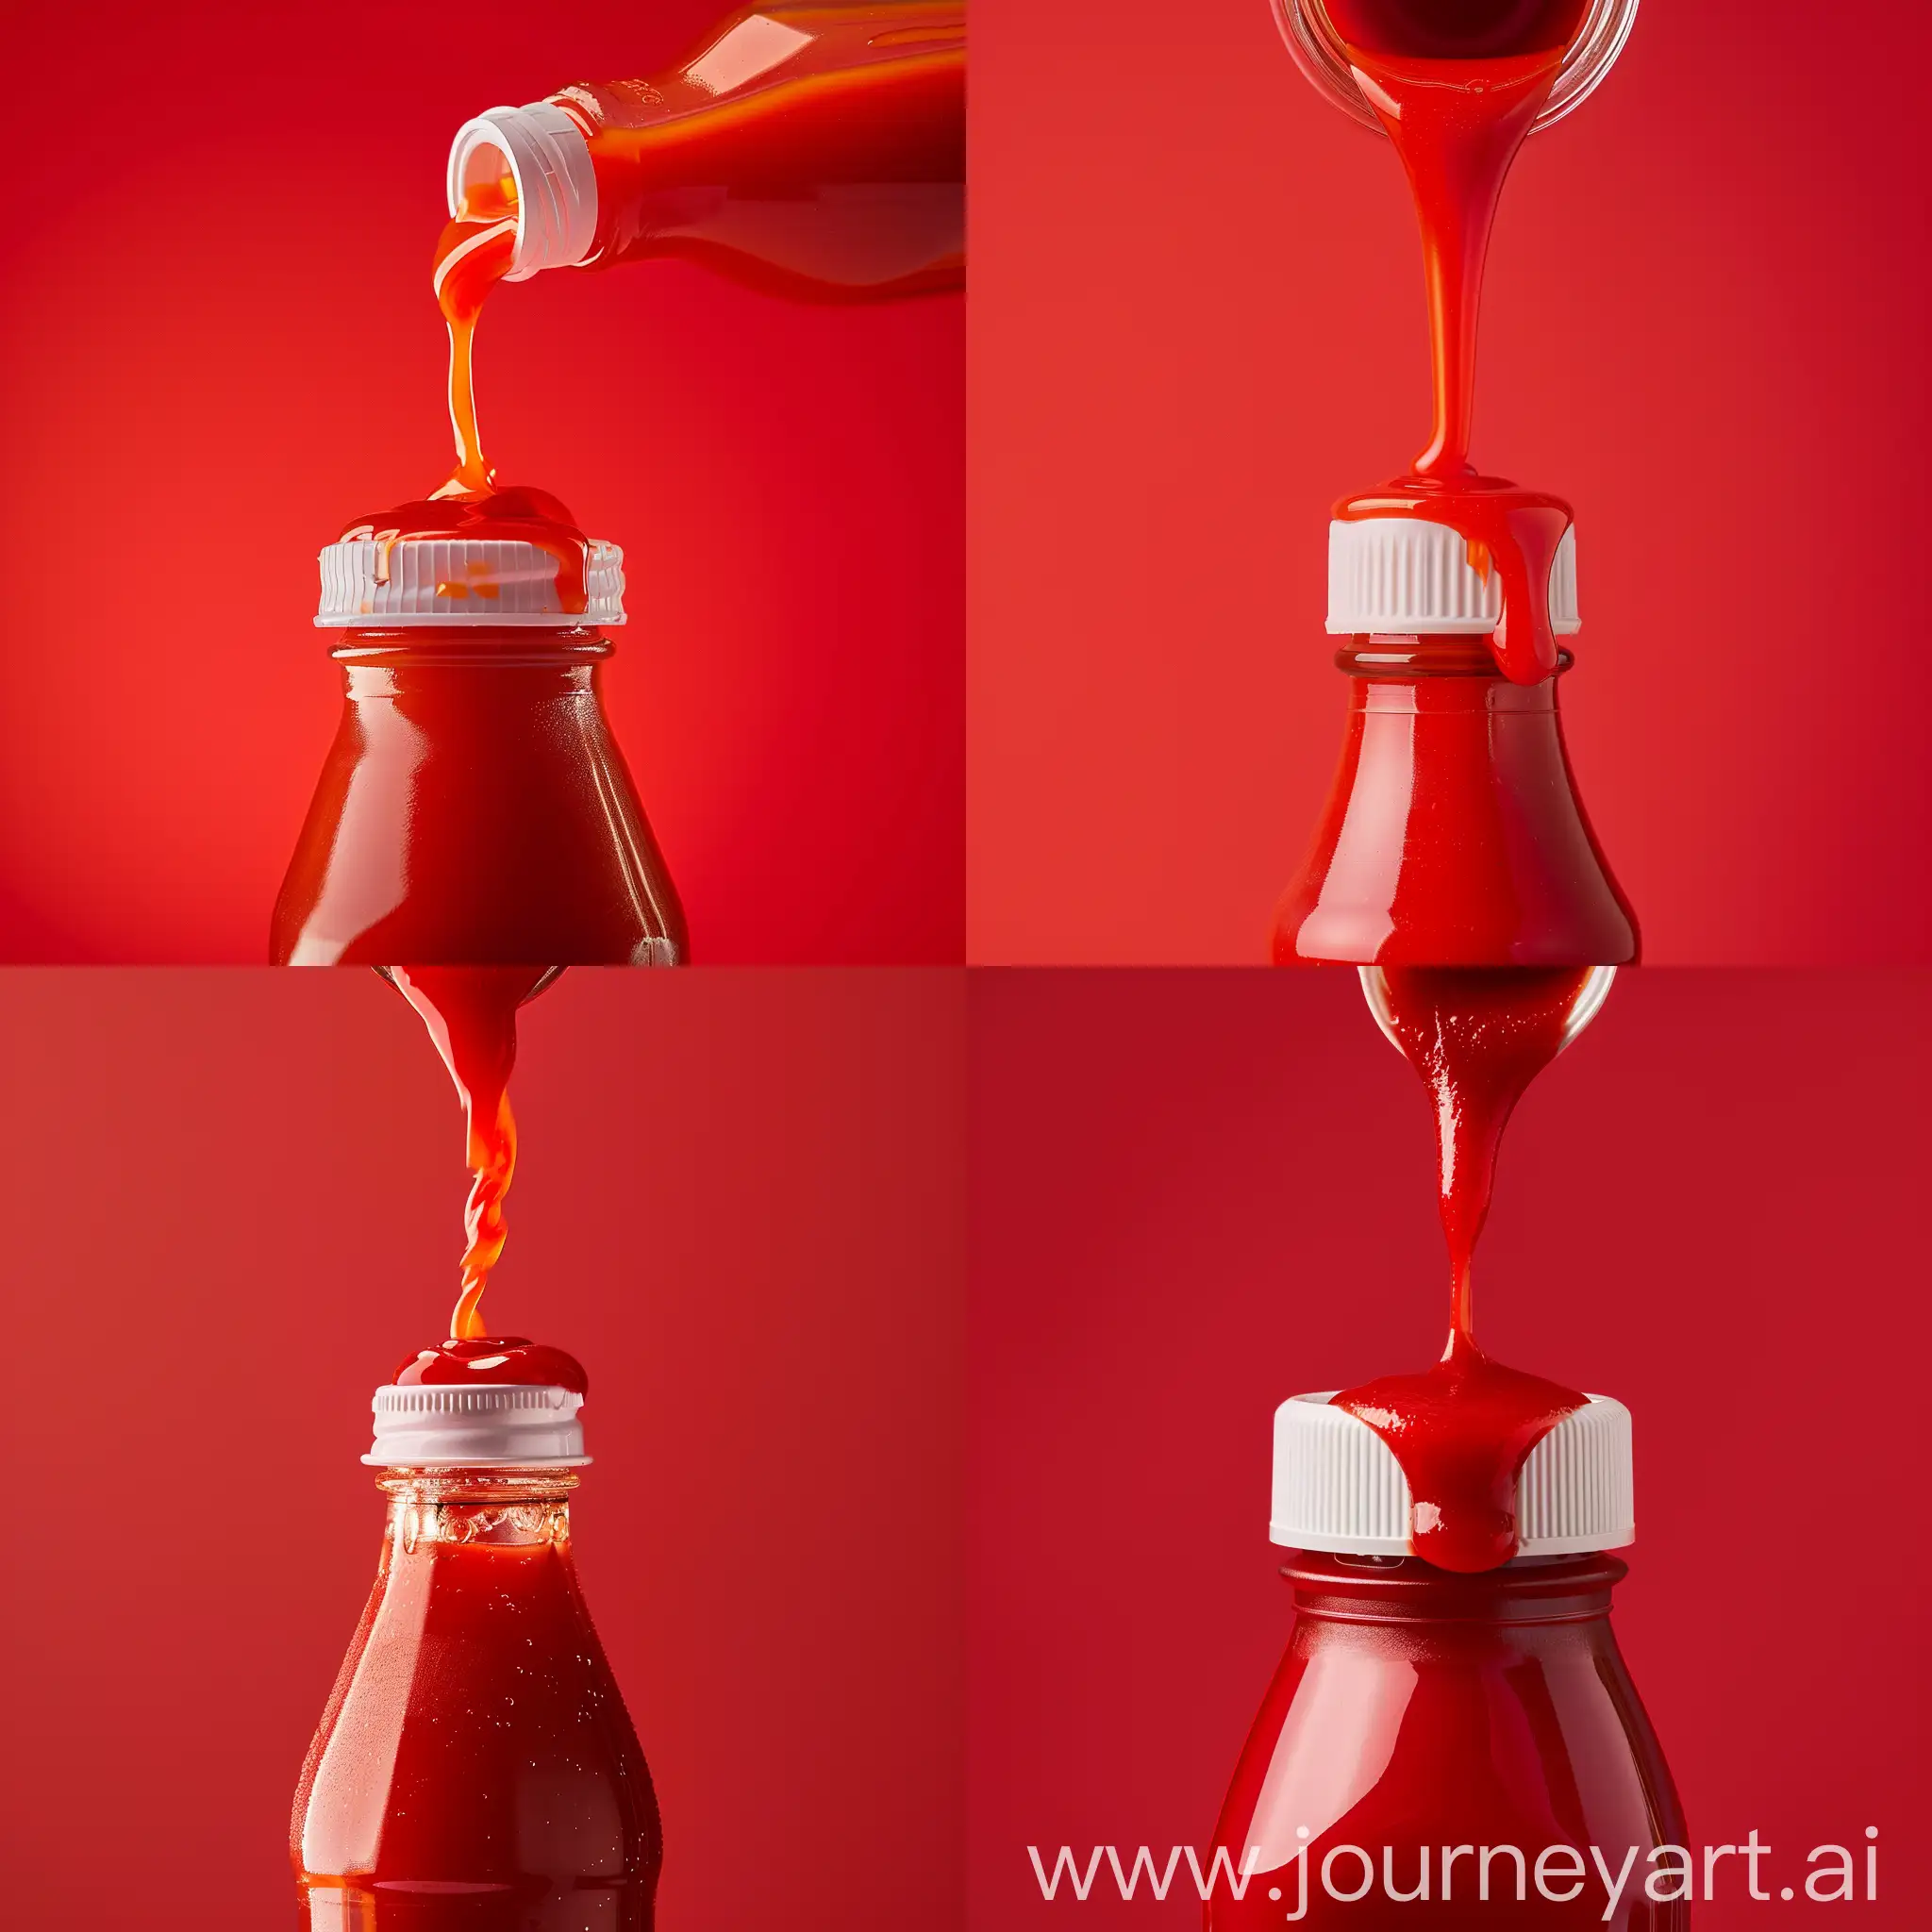 Pouring-Tomato-Ketchup-from-Red-Bottle-on-Red-Background